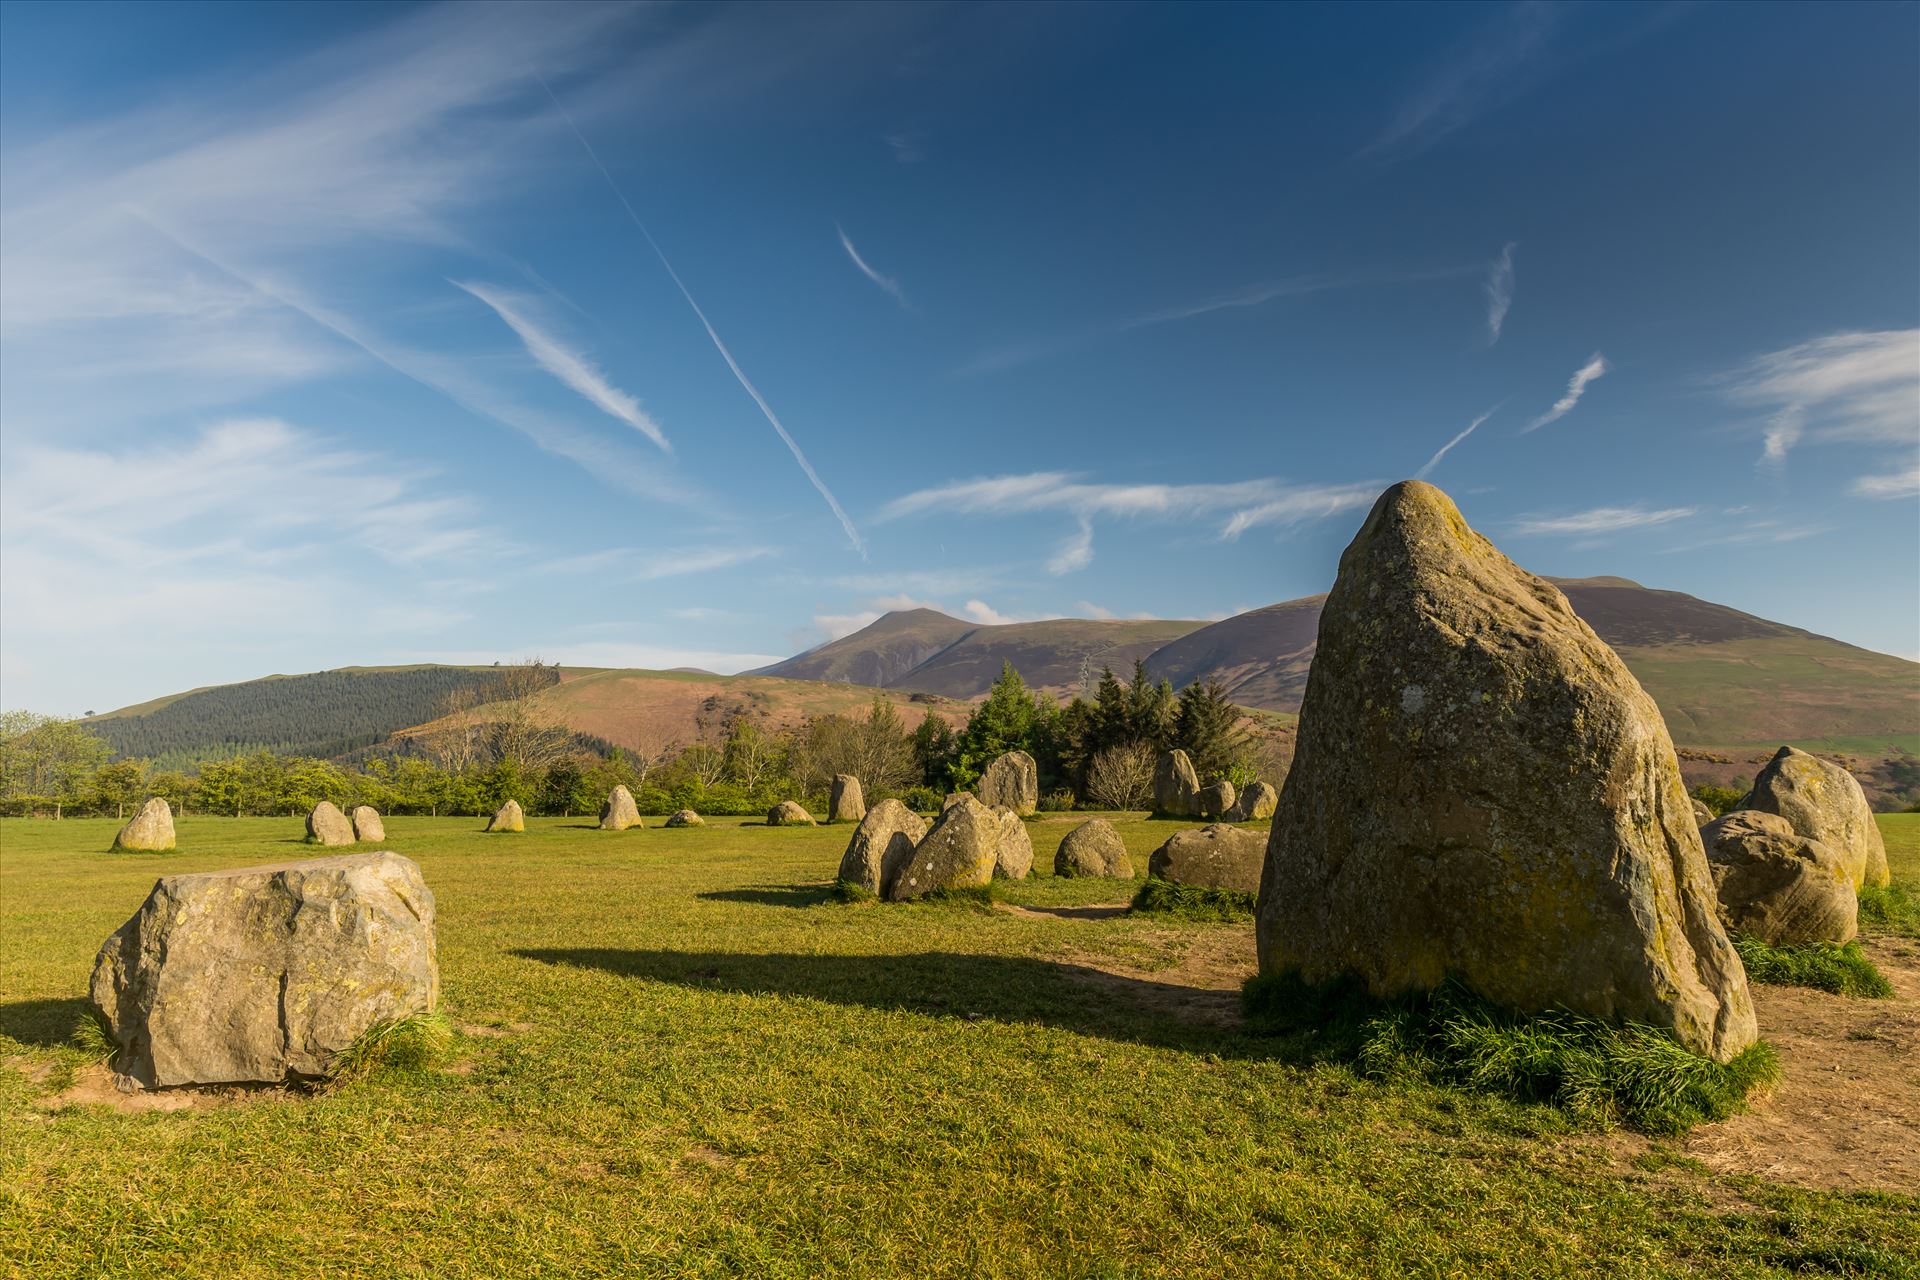 Castlerigg stone circle One of around 1,300 stone circles in the British Isles, it was constructed as a part of a megalithic tradition that lasted from 3,300 to 900 BC, during the Late Neolithic and Early Bronze Ages. The stone circle is situated nr Keswick by philreay